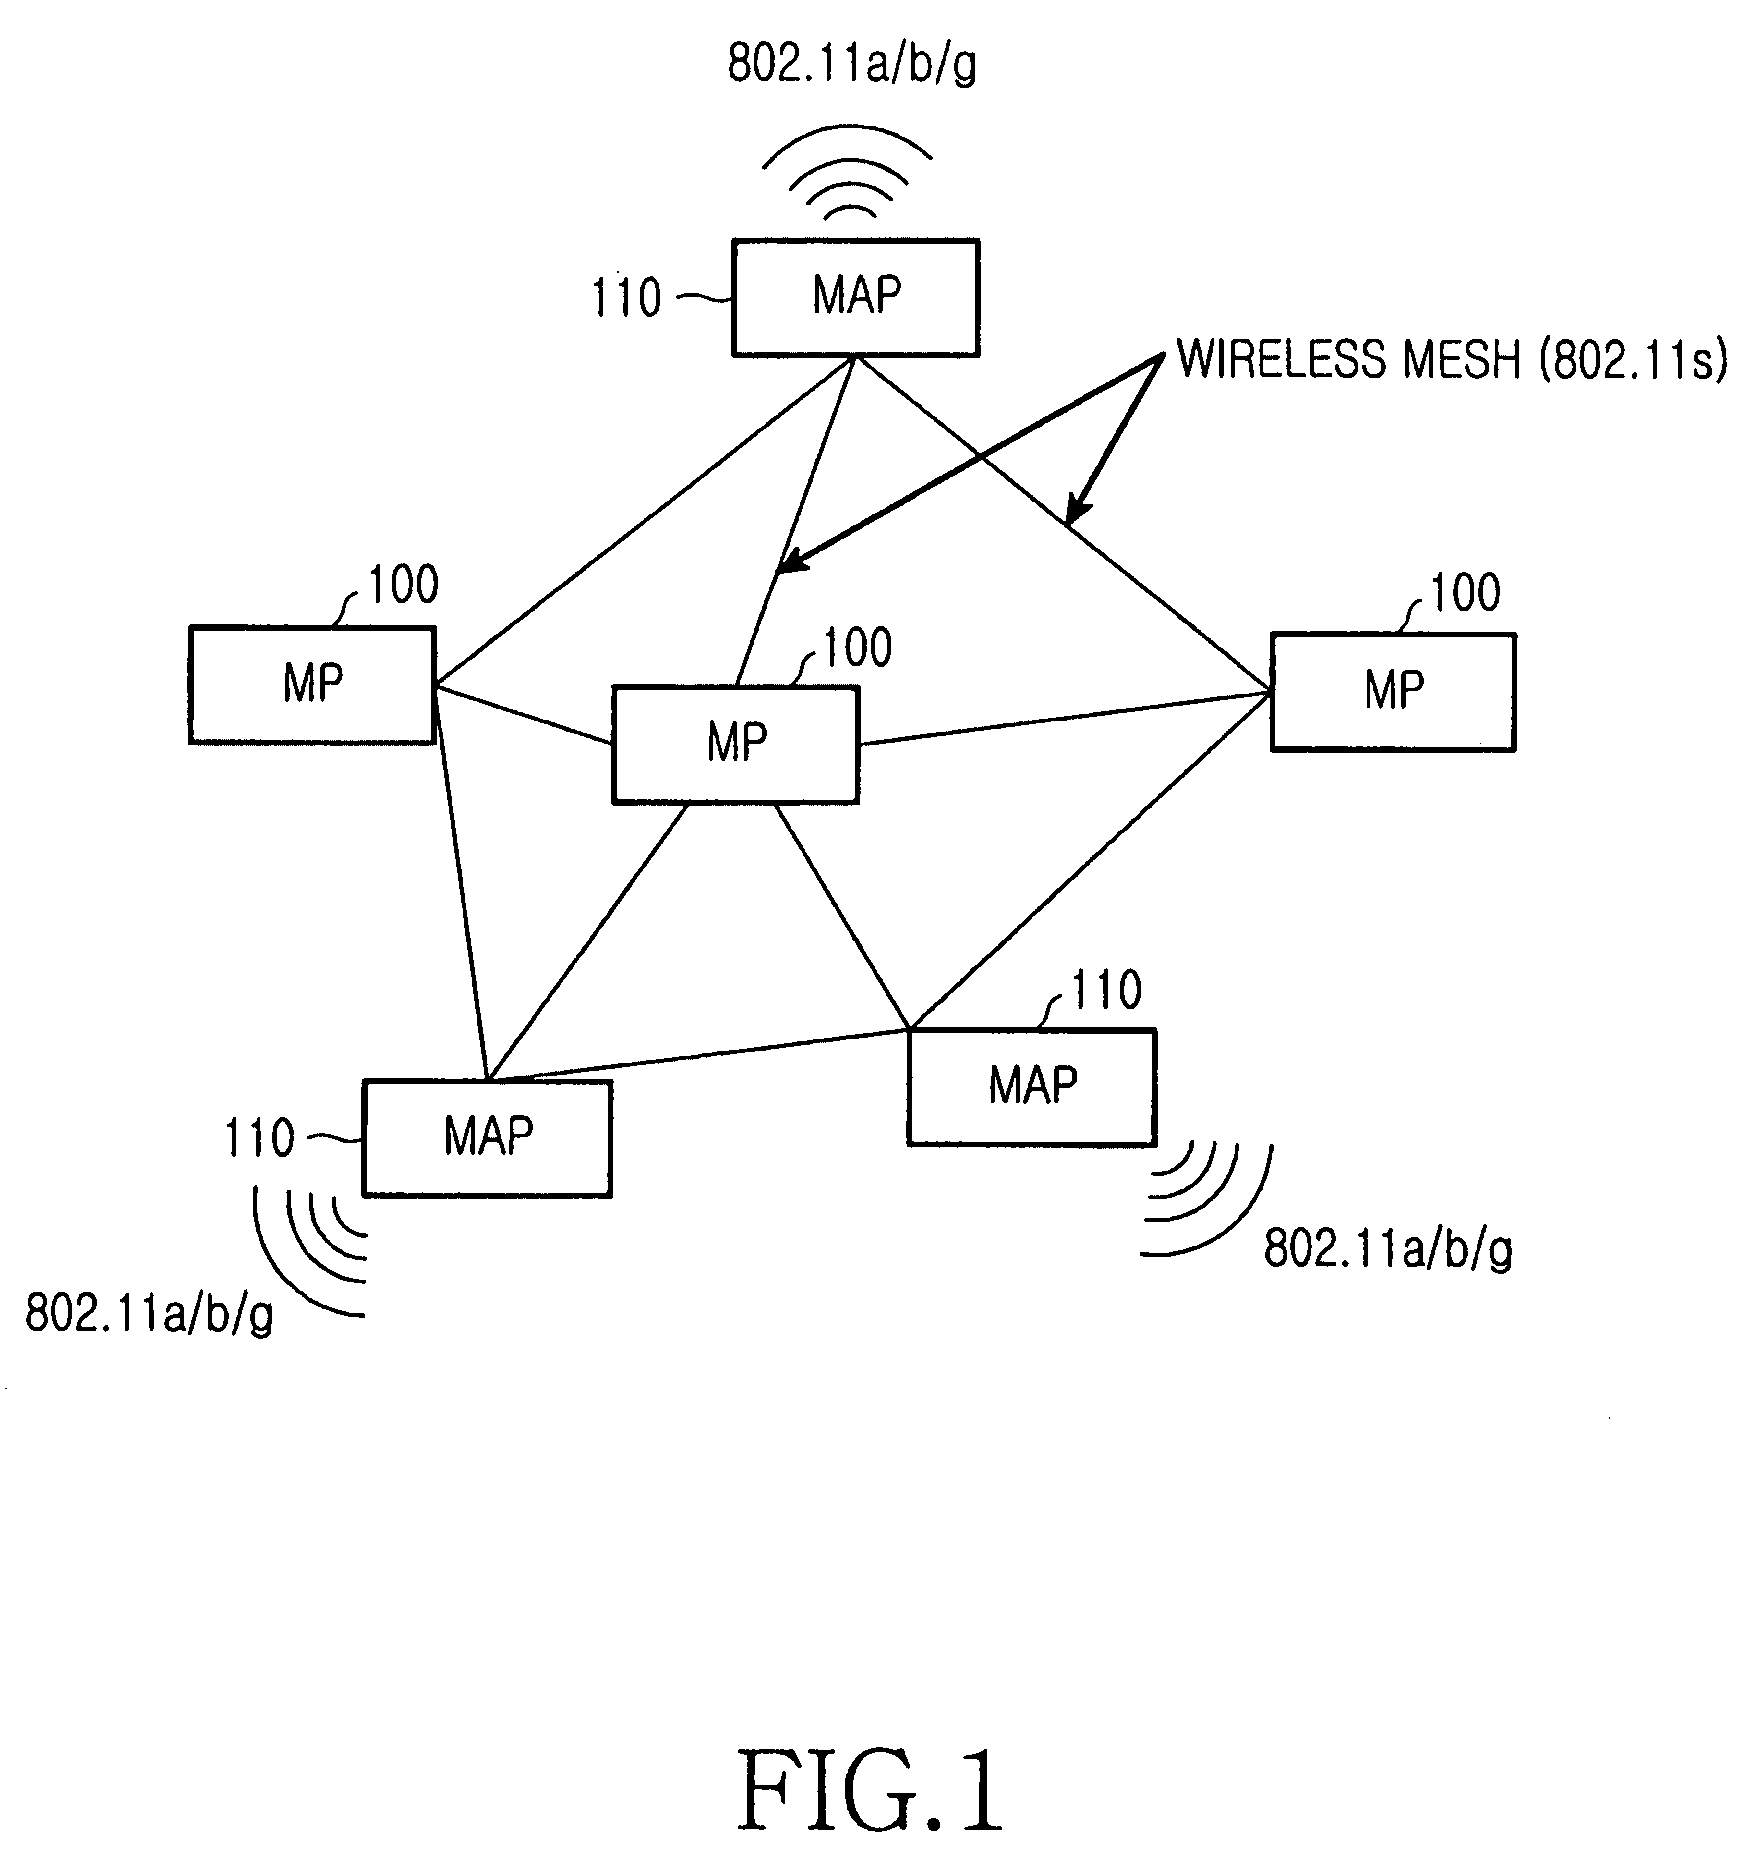 Multi-channel MAC apparatus and method for WLAN devices with single radio interface